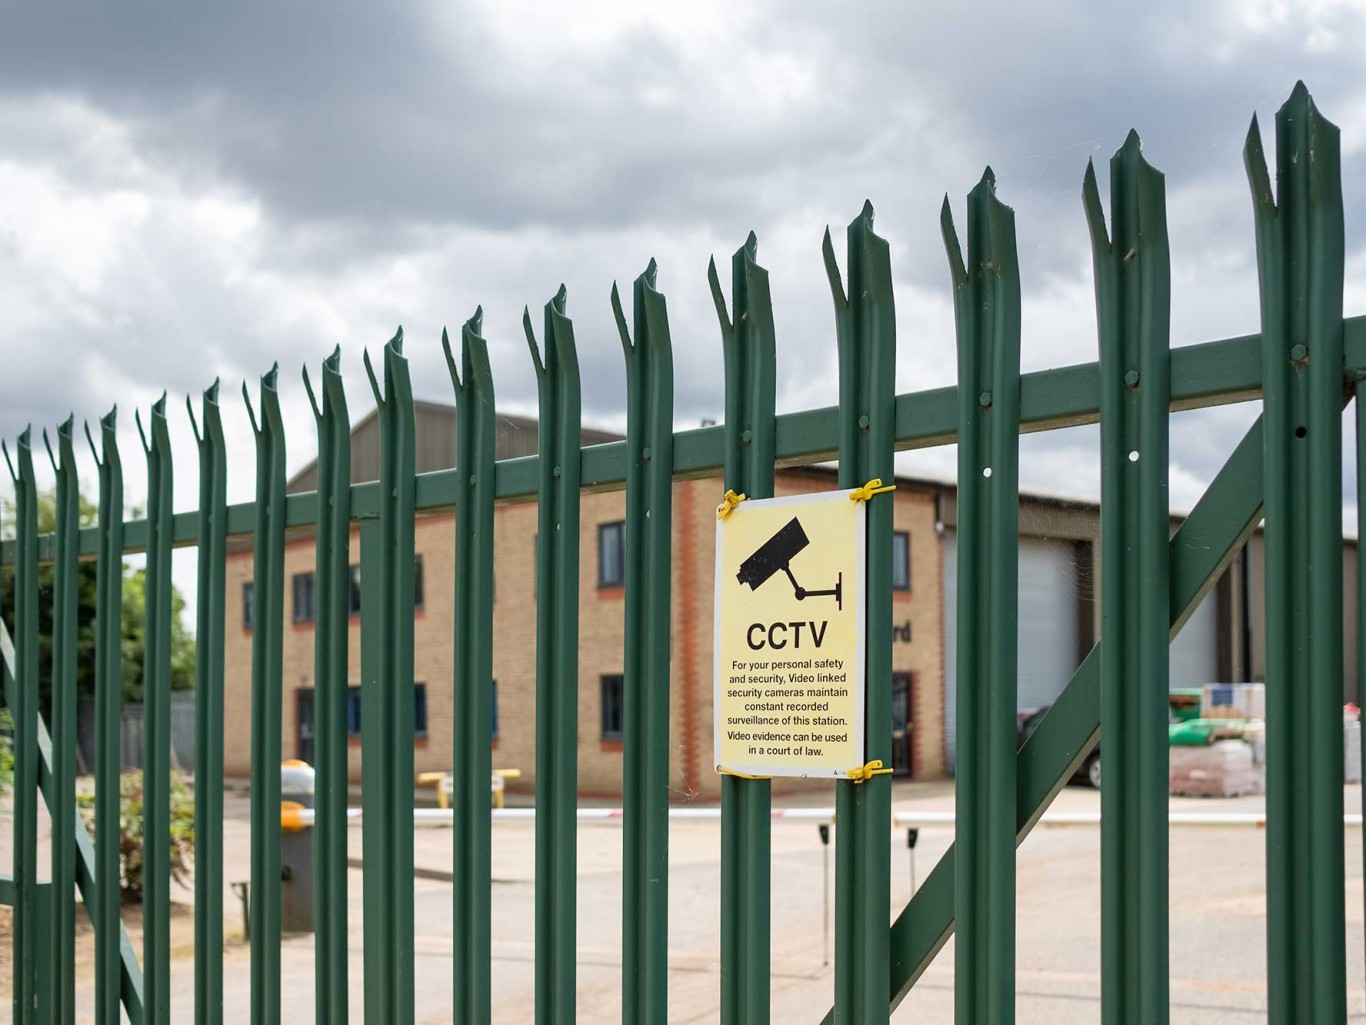 Green pallside steel fencing with cctv sign attached and soft focus background.